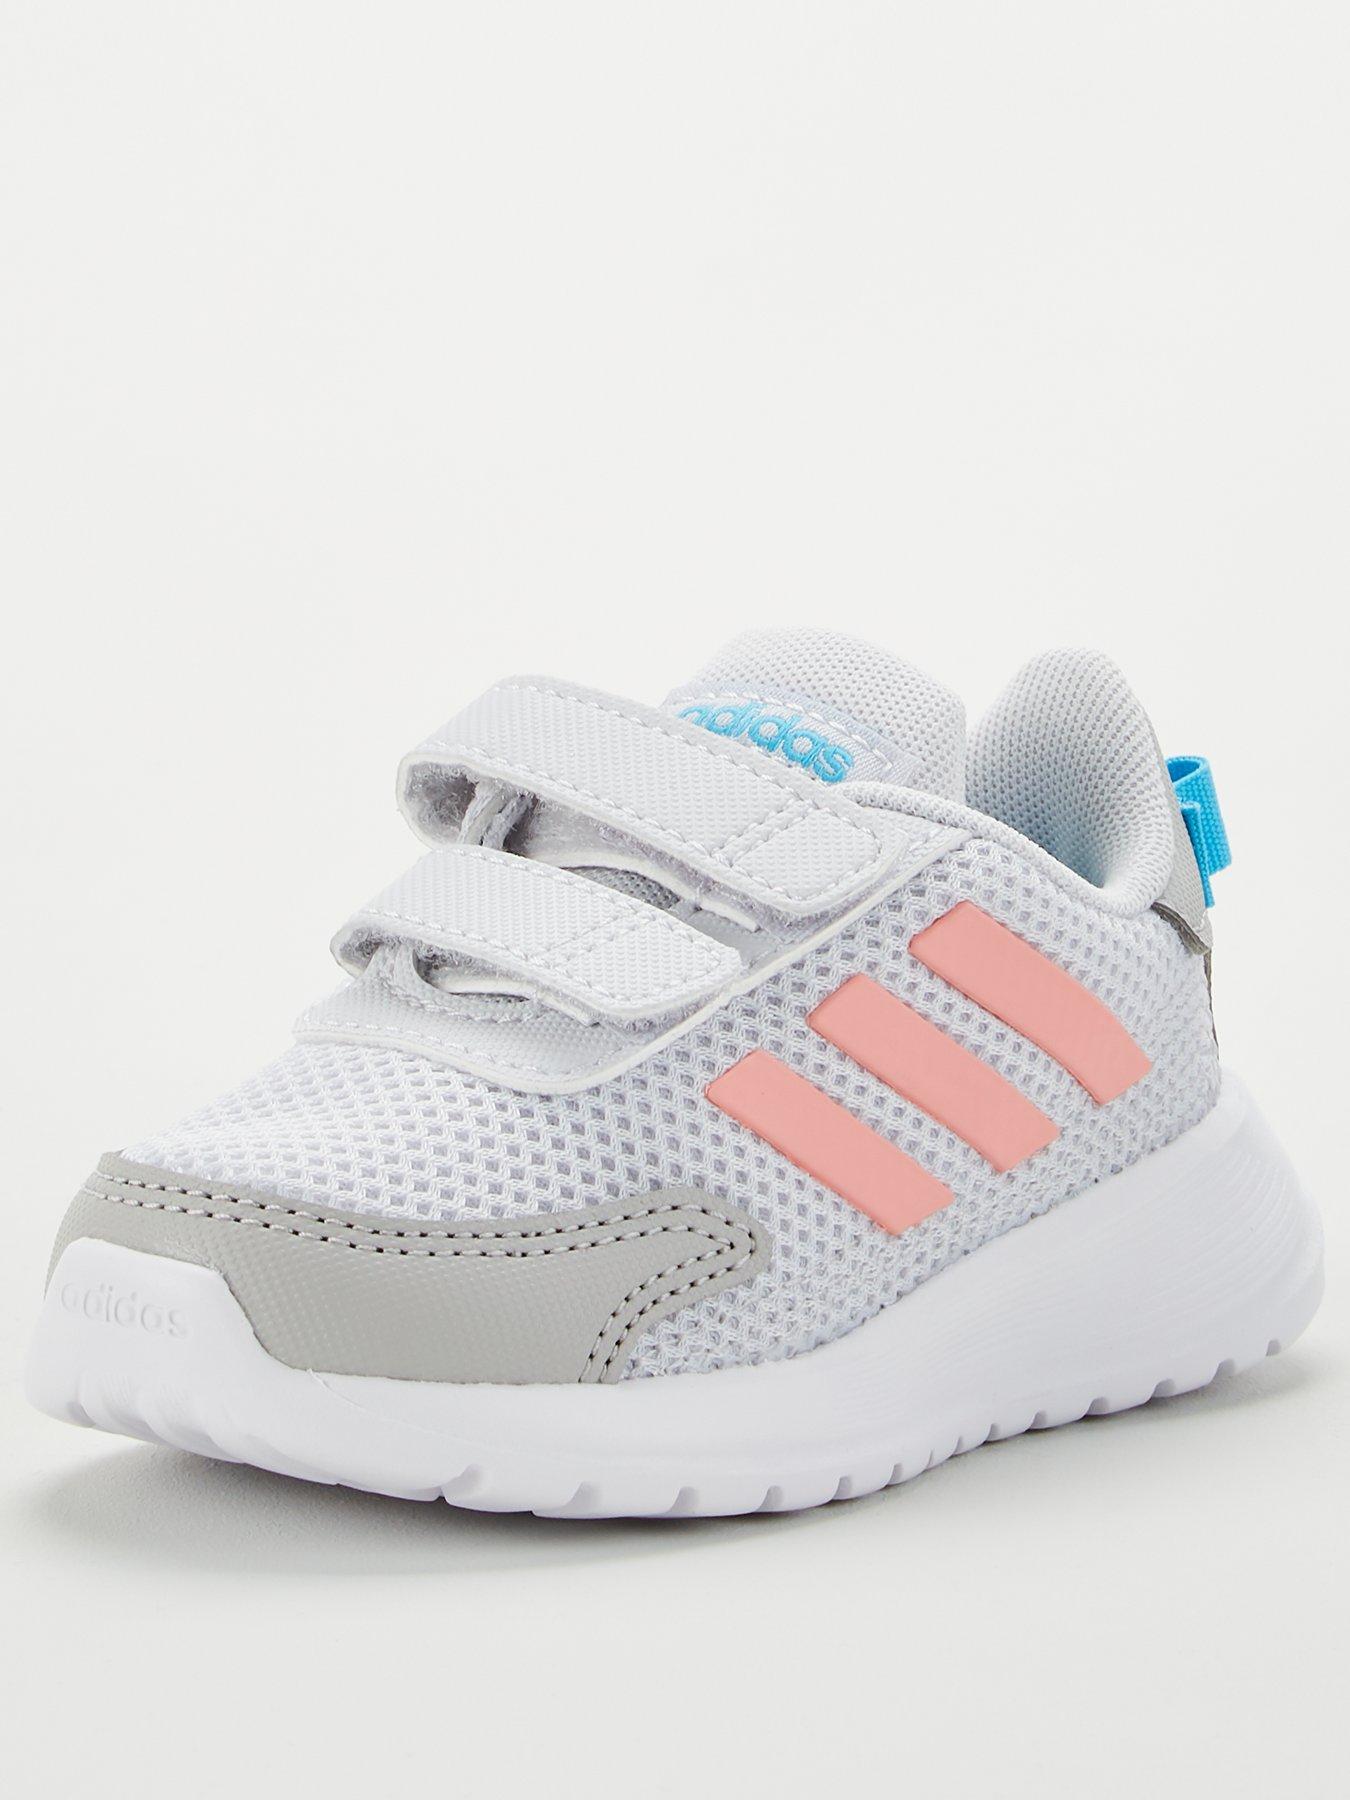 infant size 4 adidas trainers